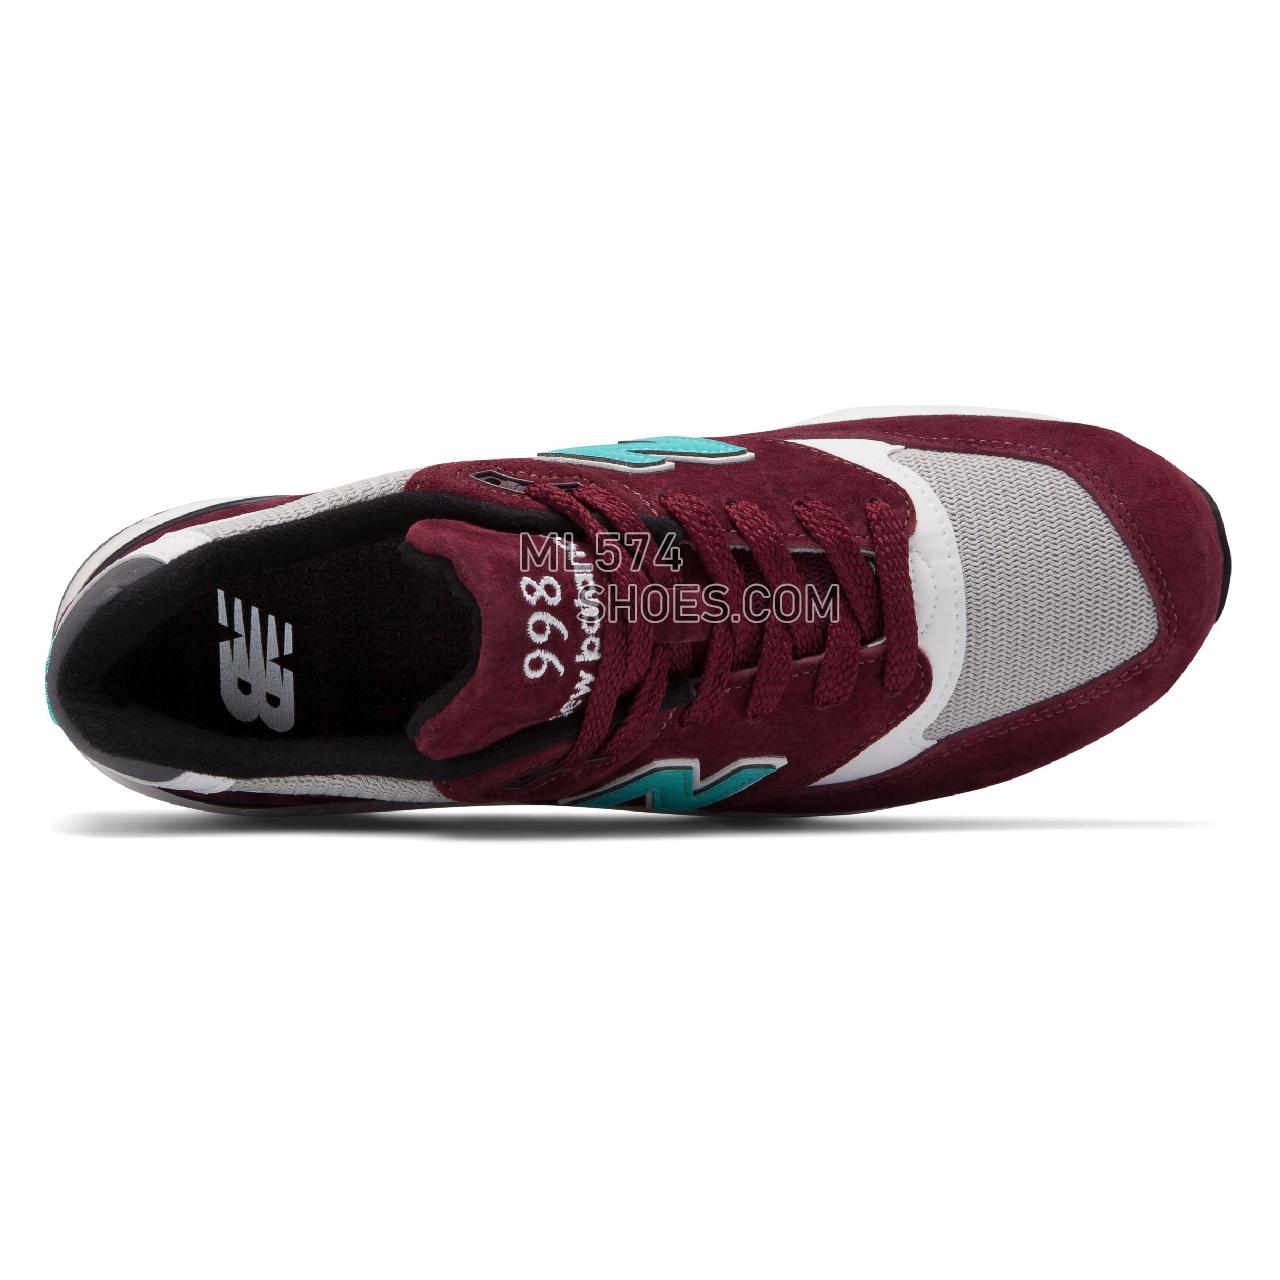 New Balance Made in US 998 - Men's 998 Made in US - Burgundy with Blue - M998AWC